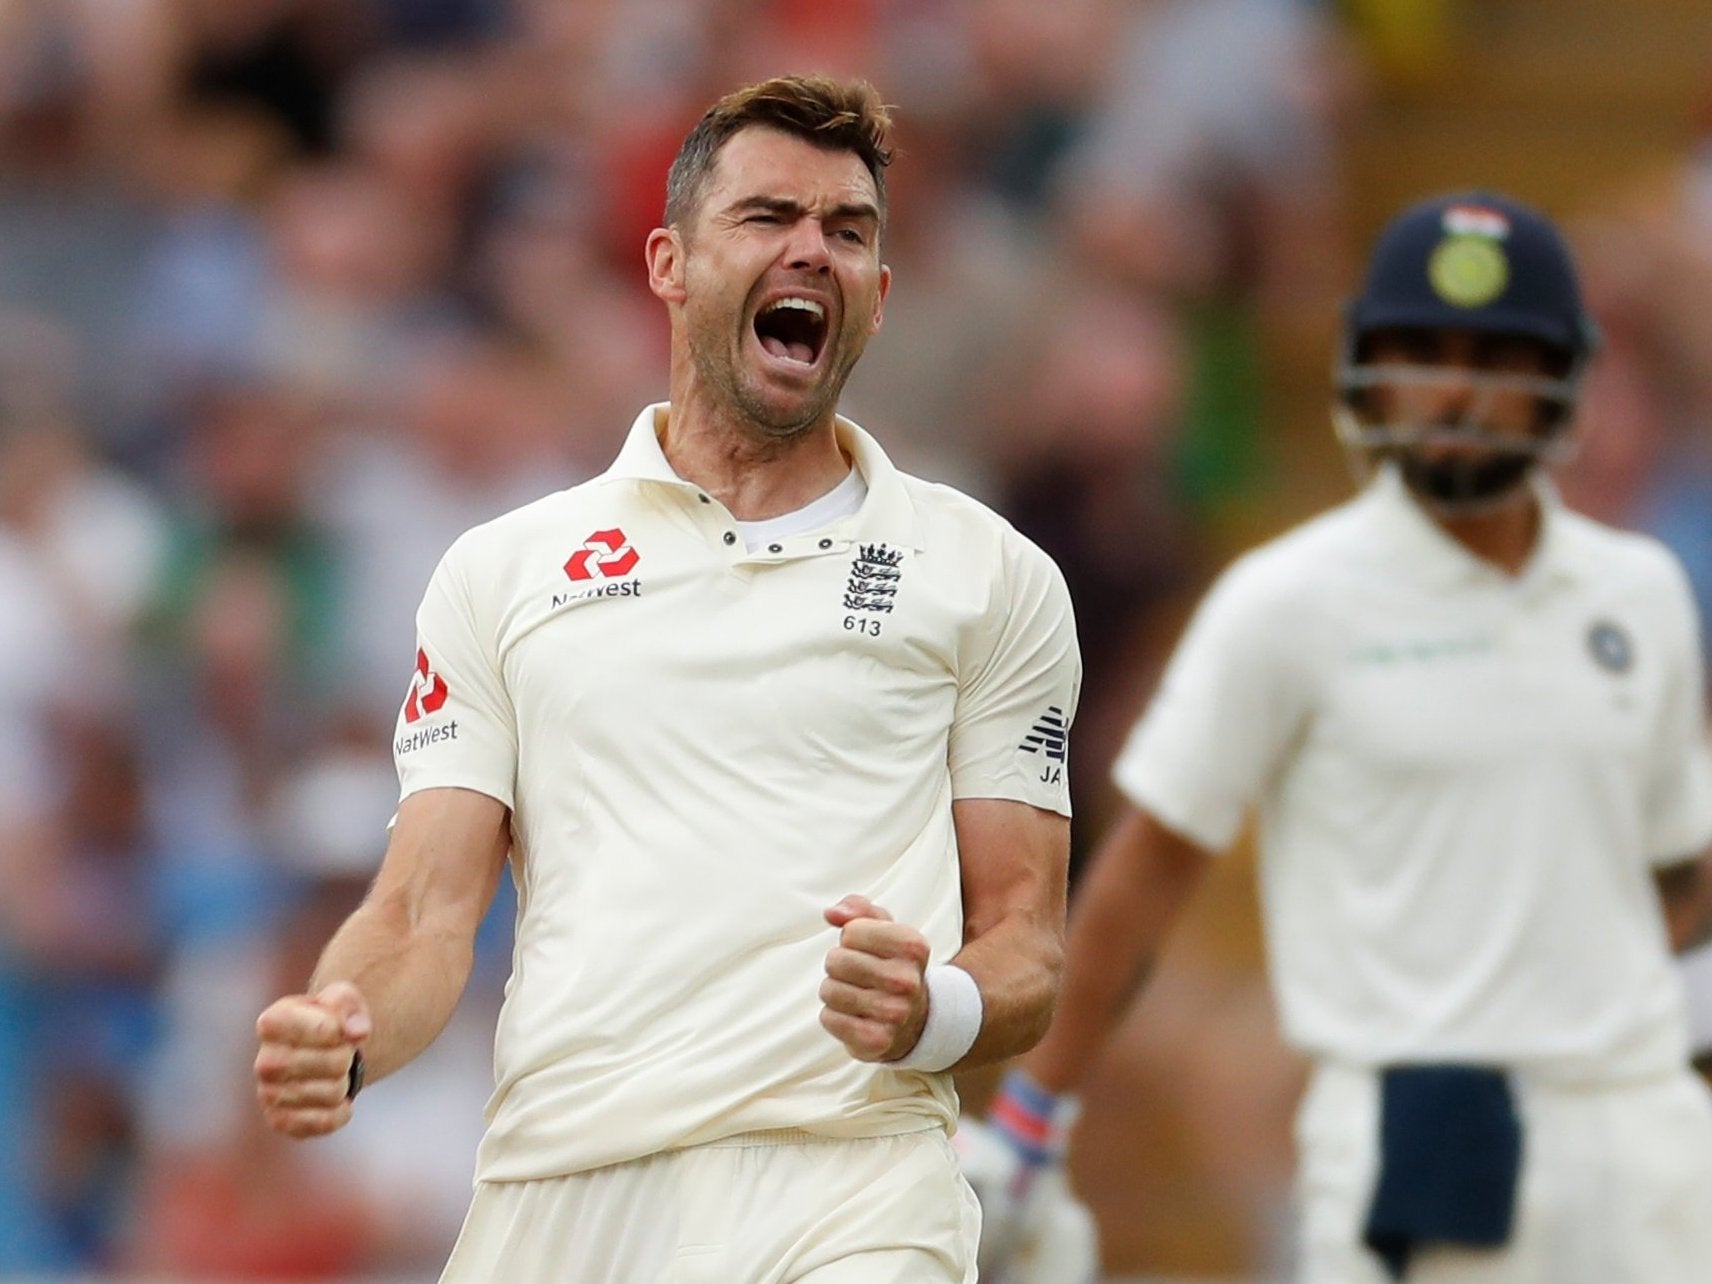 Anderson has been backed to set a new high mark for fast bowlers